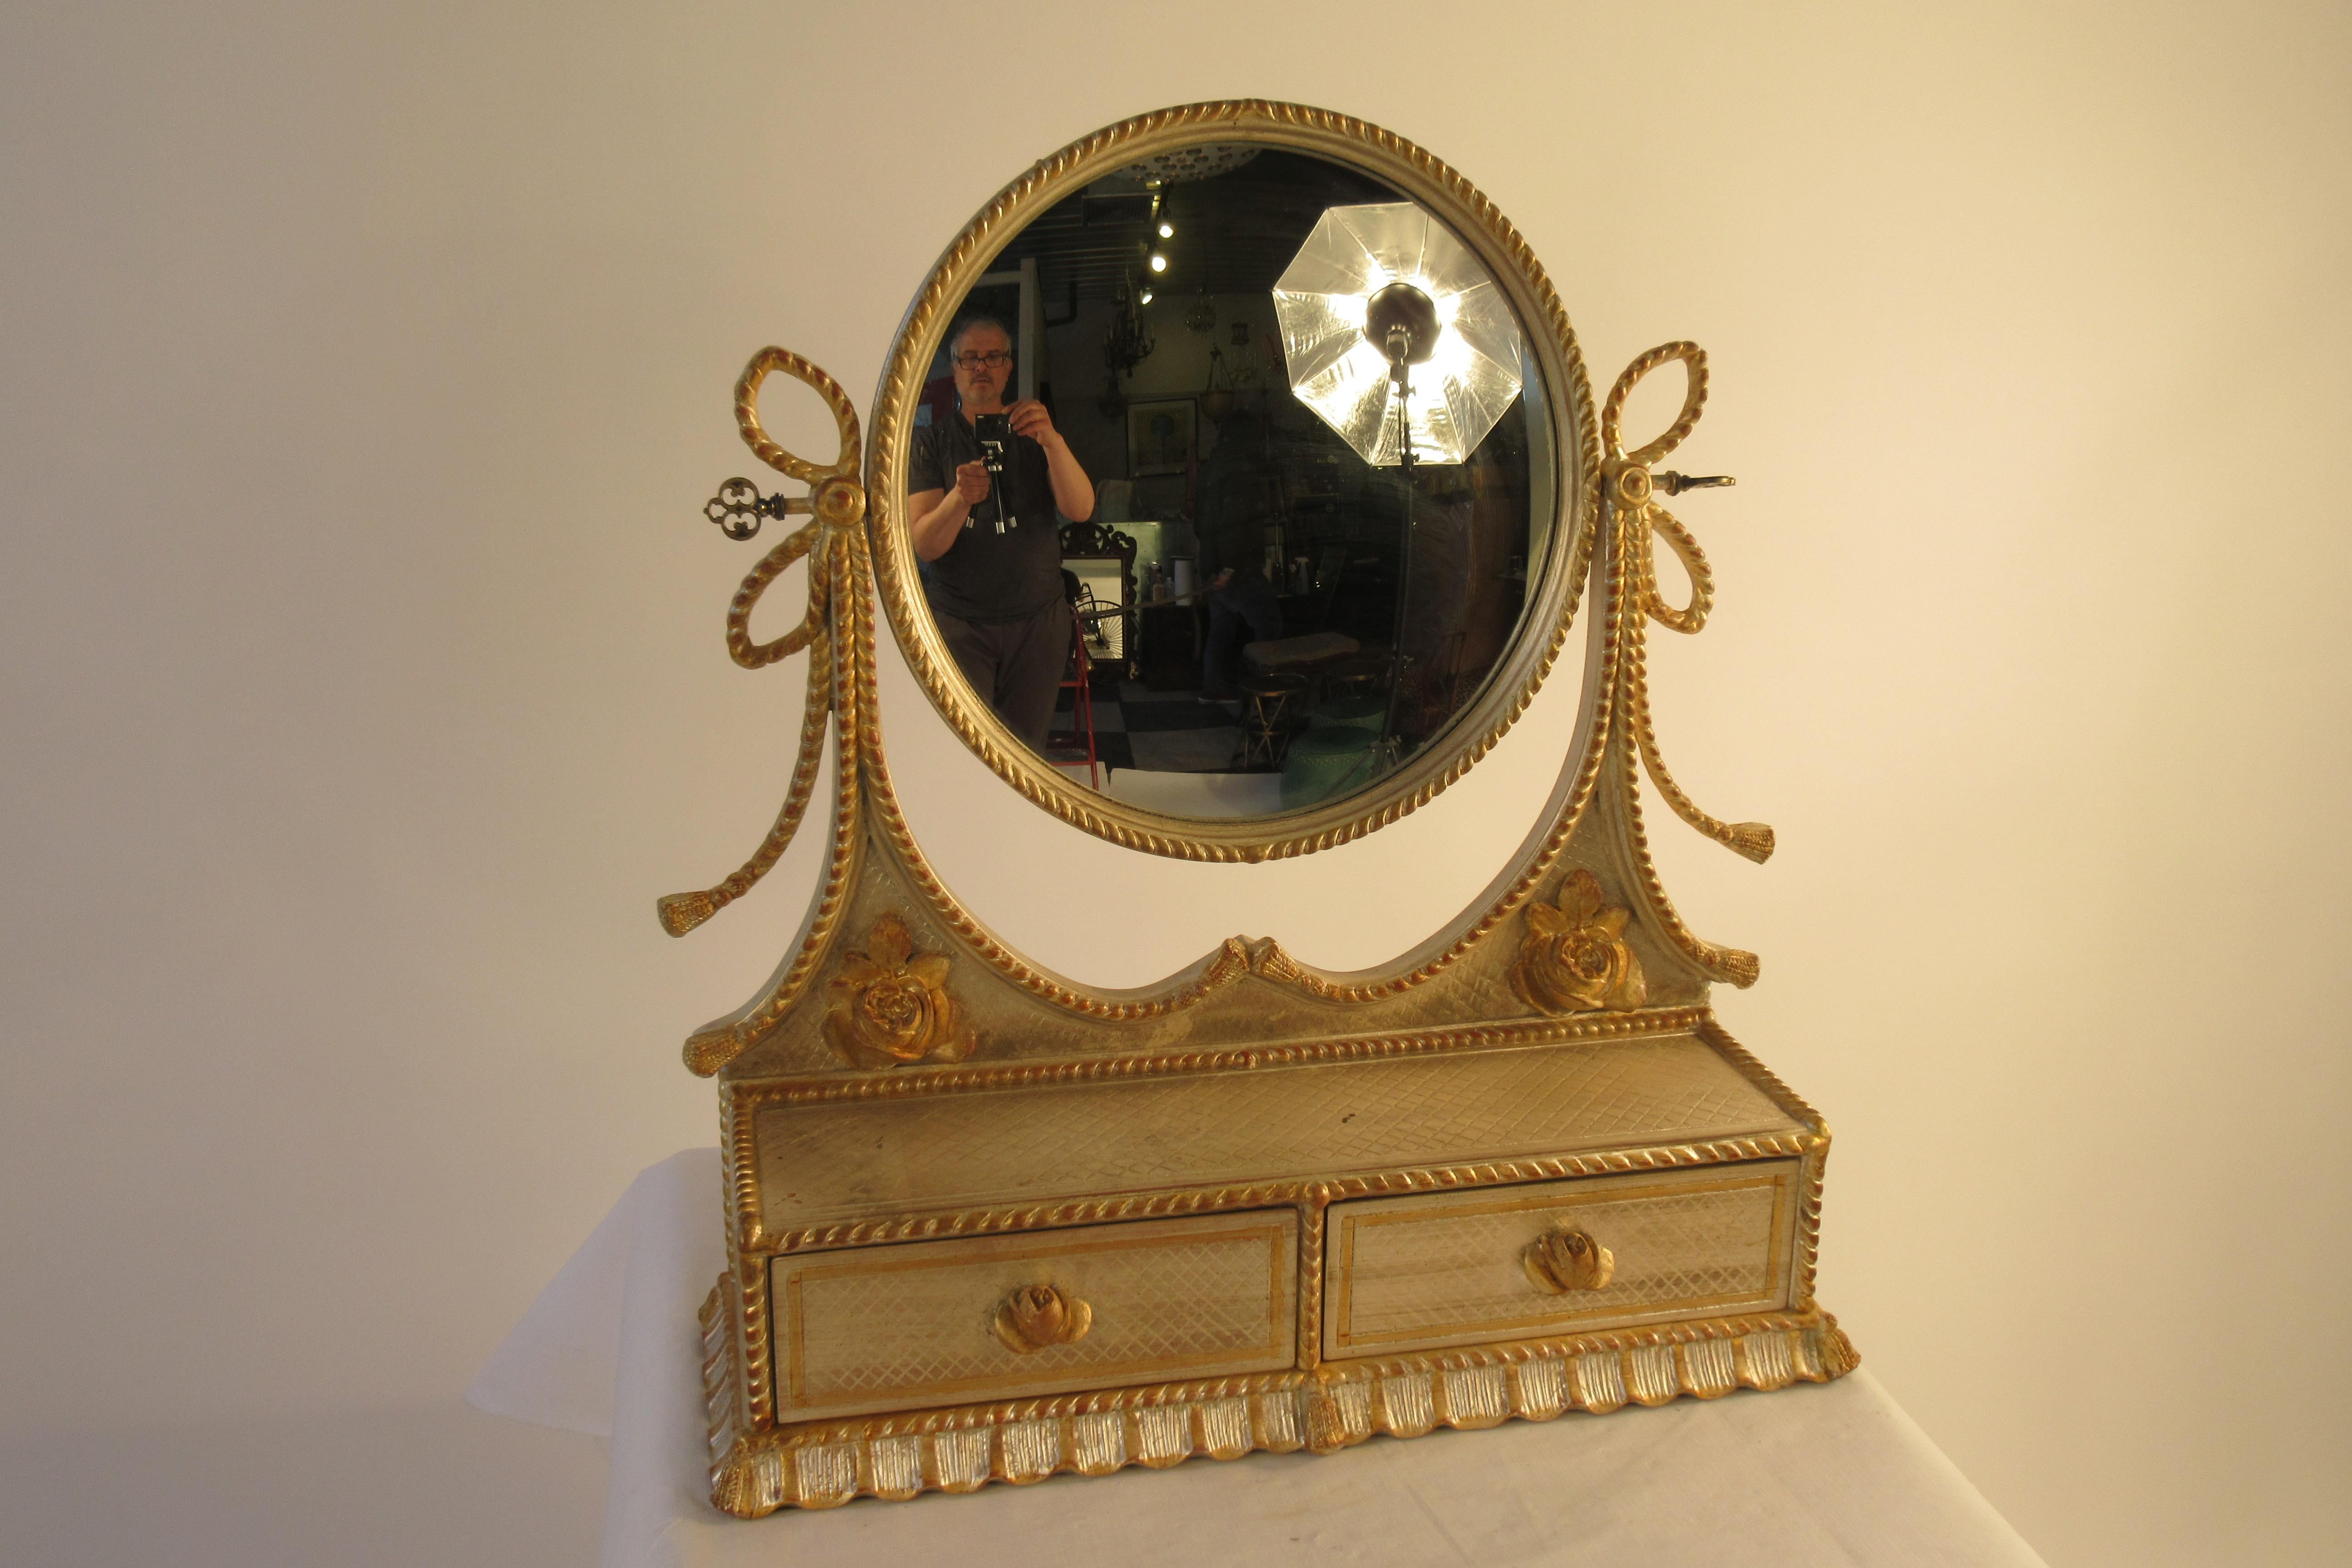 1960s Italian silver and gold painted vanity mirror. This item can be shipped UPS.